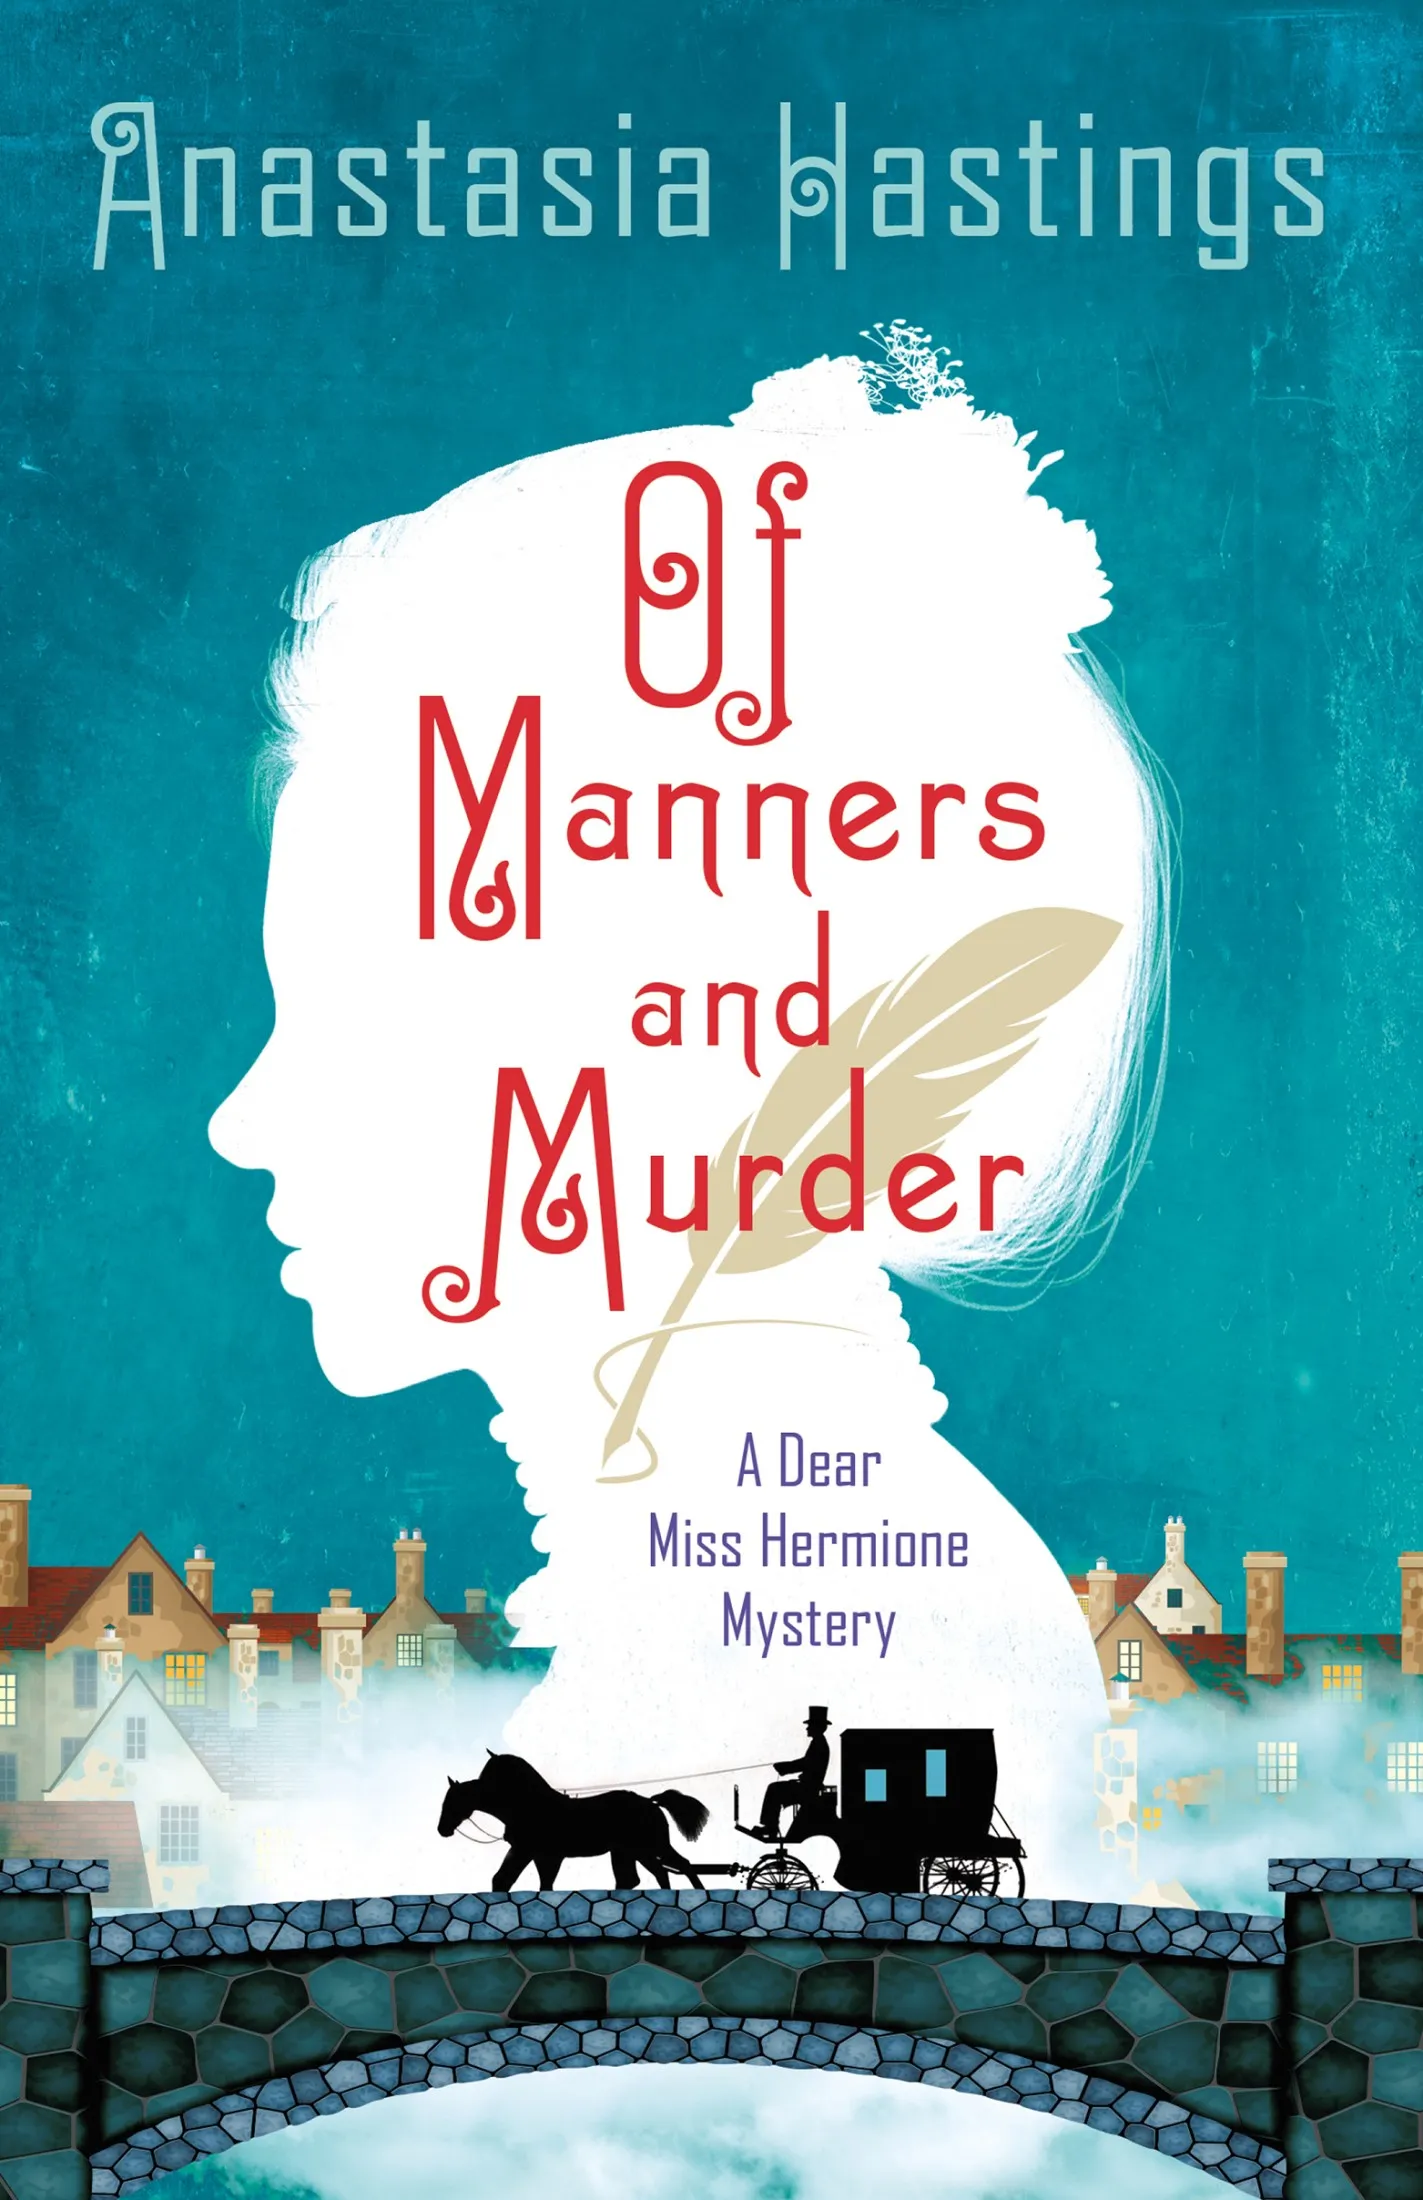 Of Manners and Murder (A Dear Miss Hermione Mystery #1)